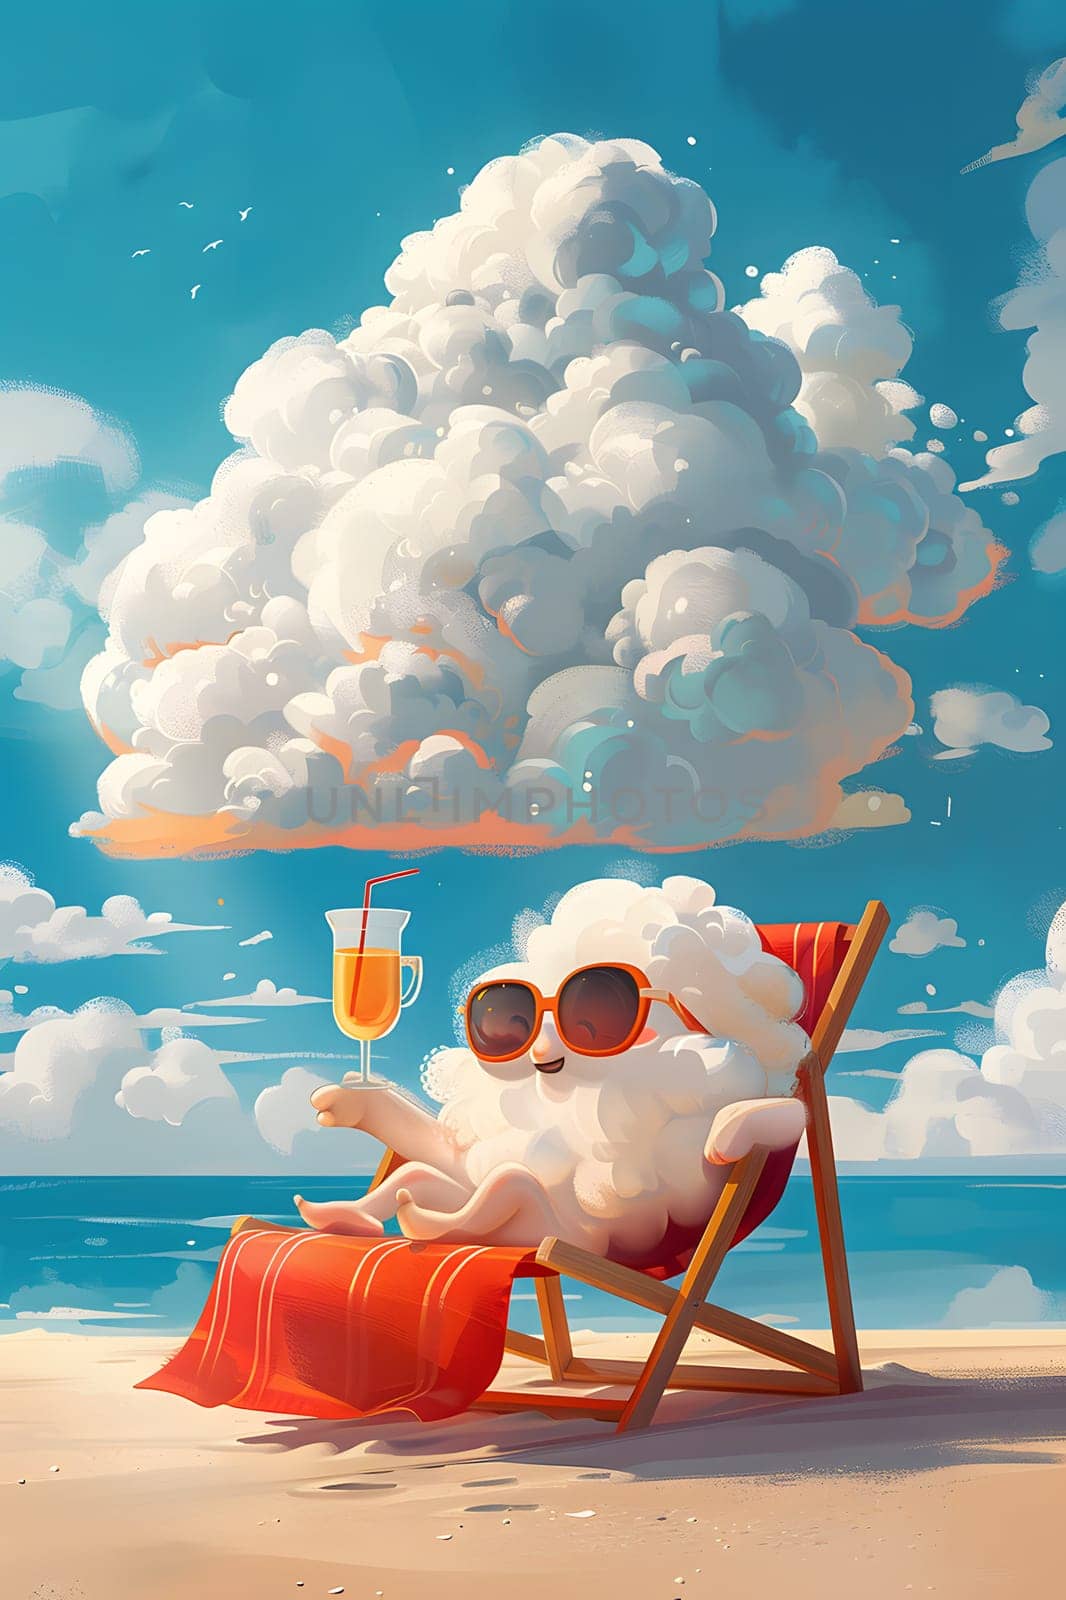 a sheep is sitting in a chair on the beach holding a glass of orange juice by Nadtochiy